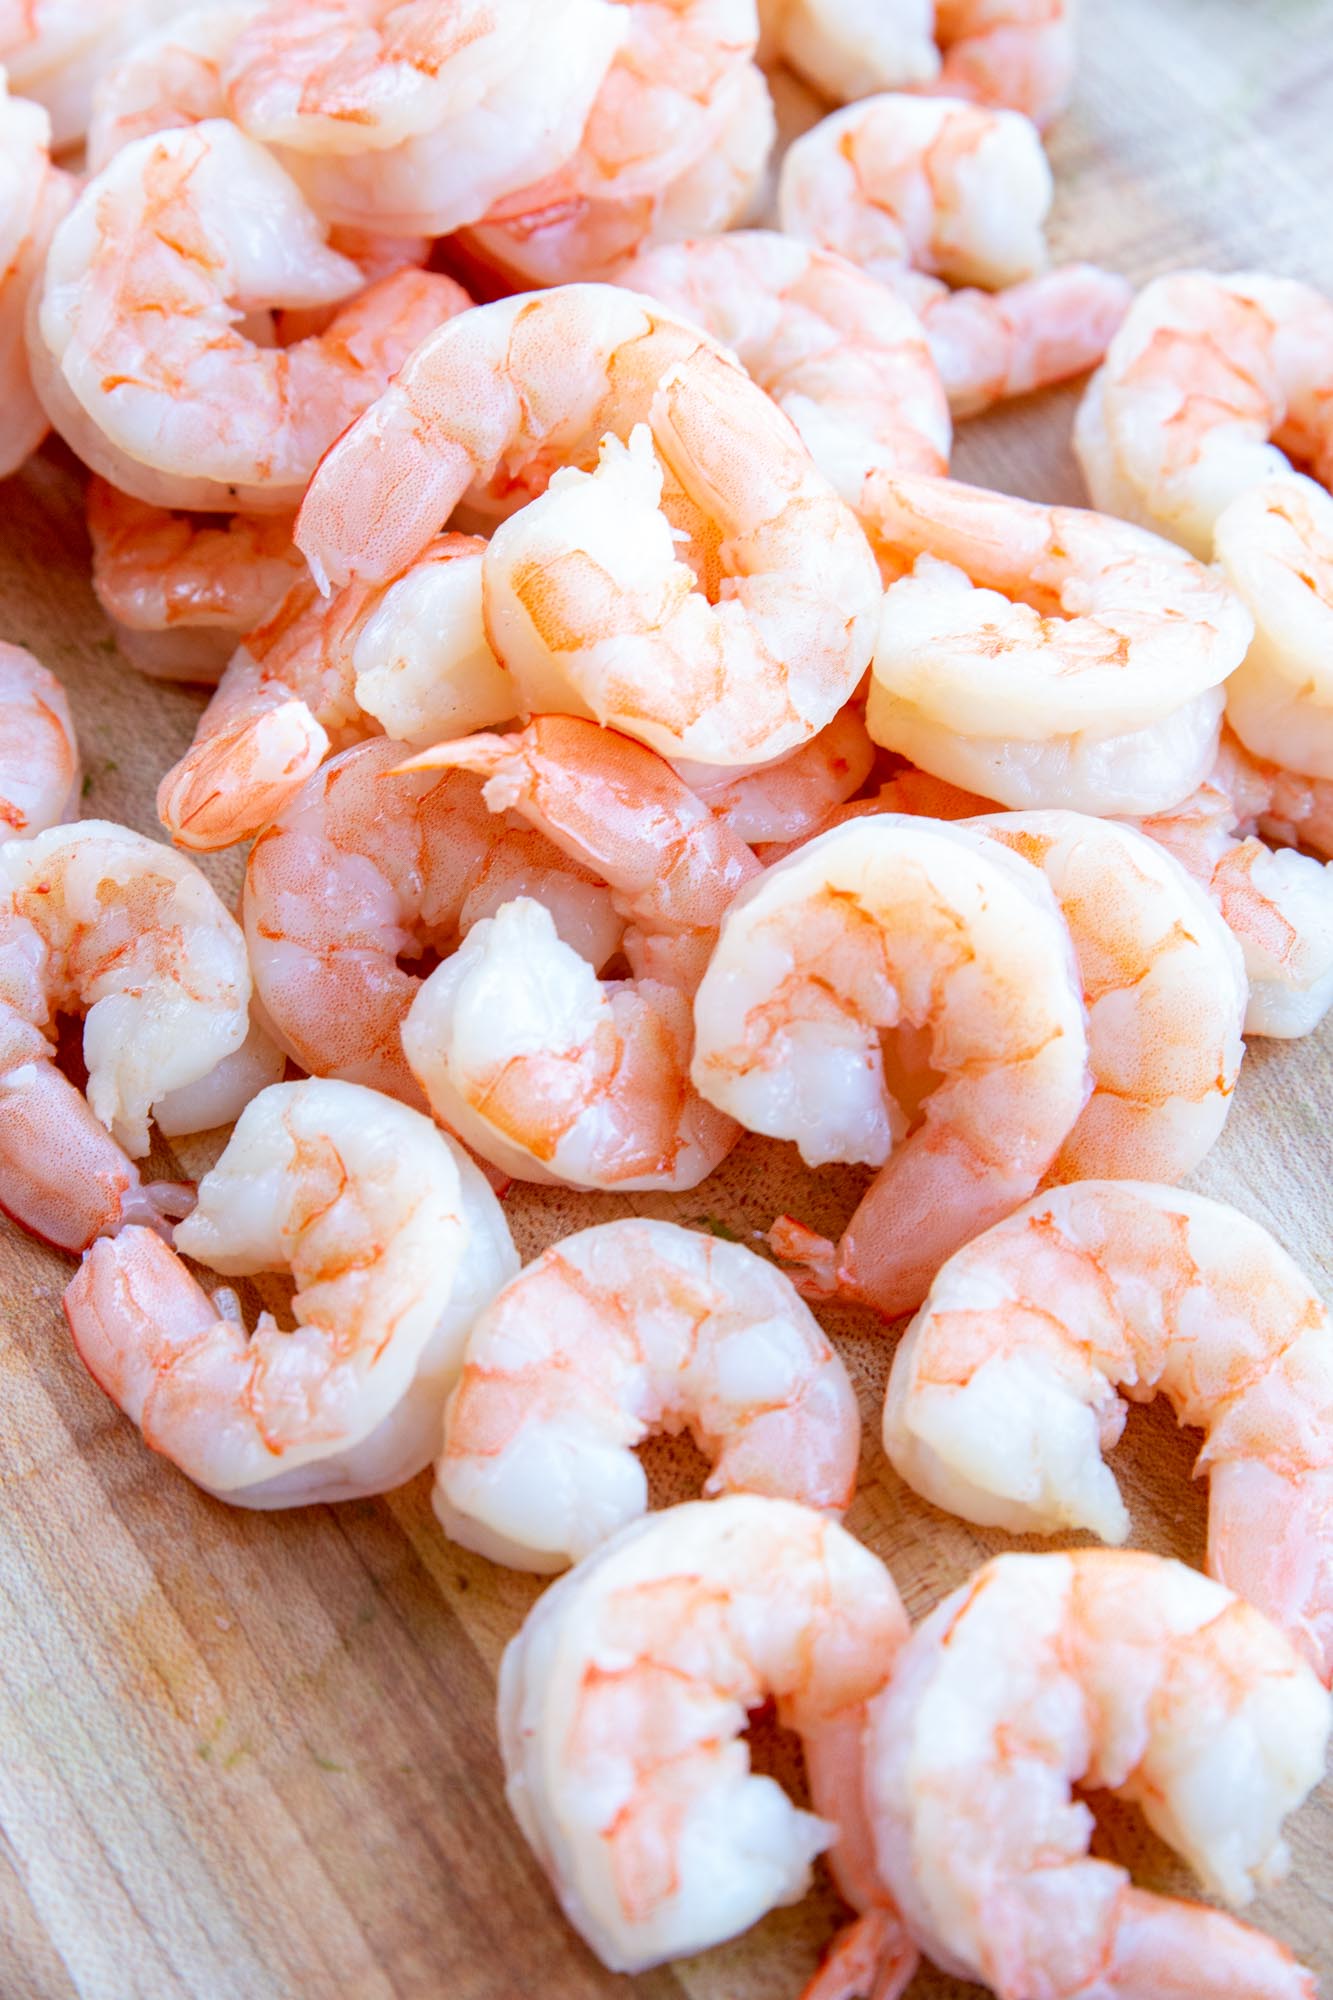 peeled and deveined poached shrimp ready for eating